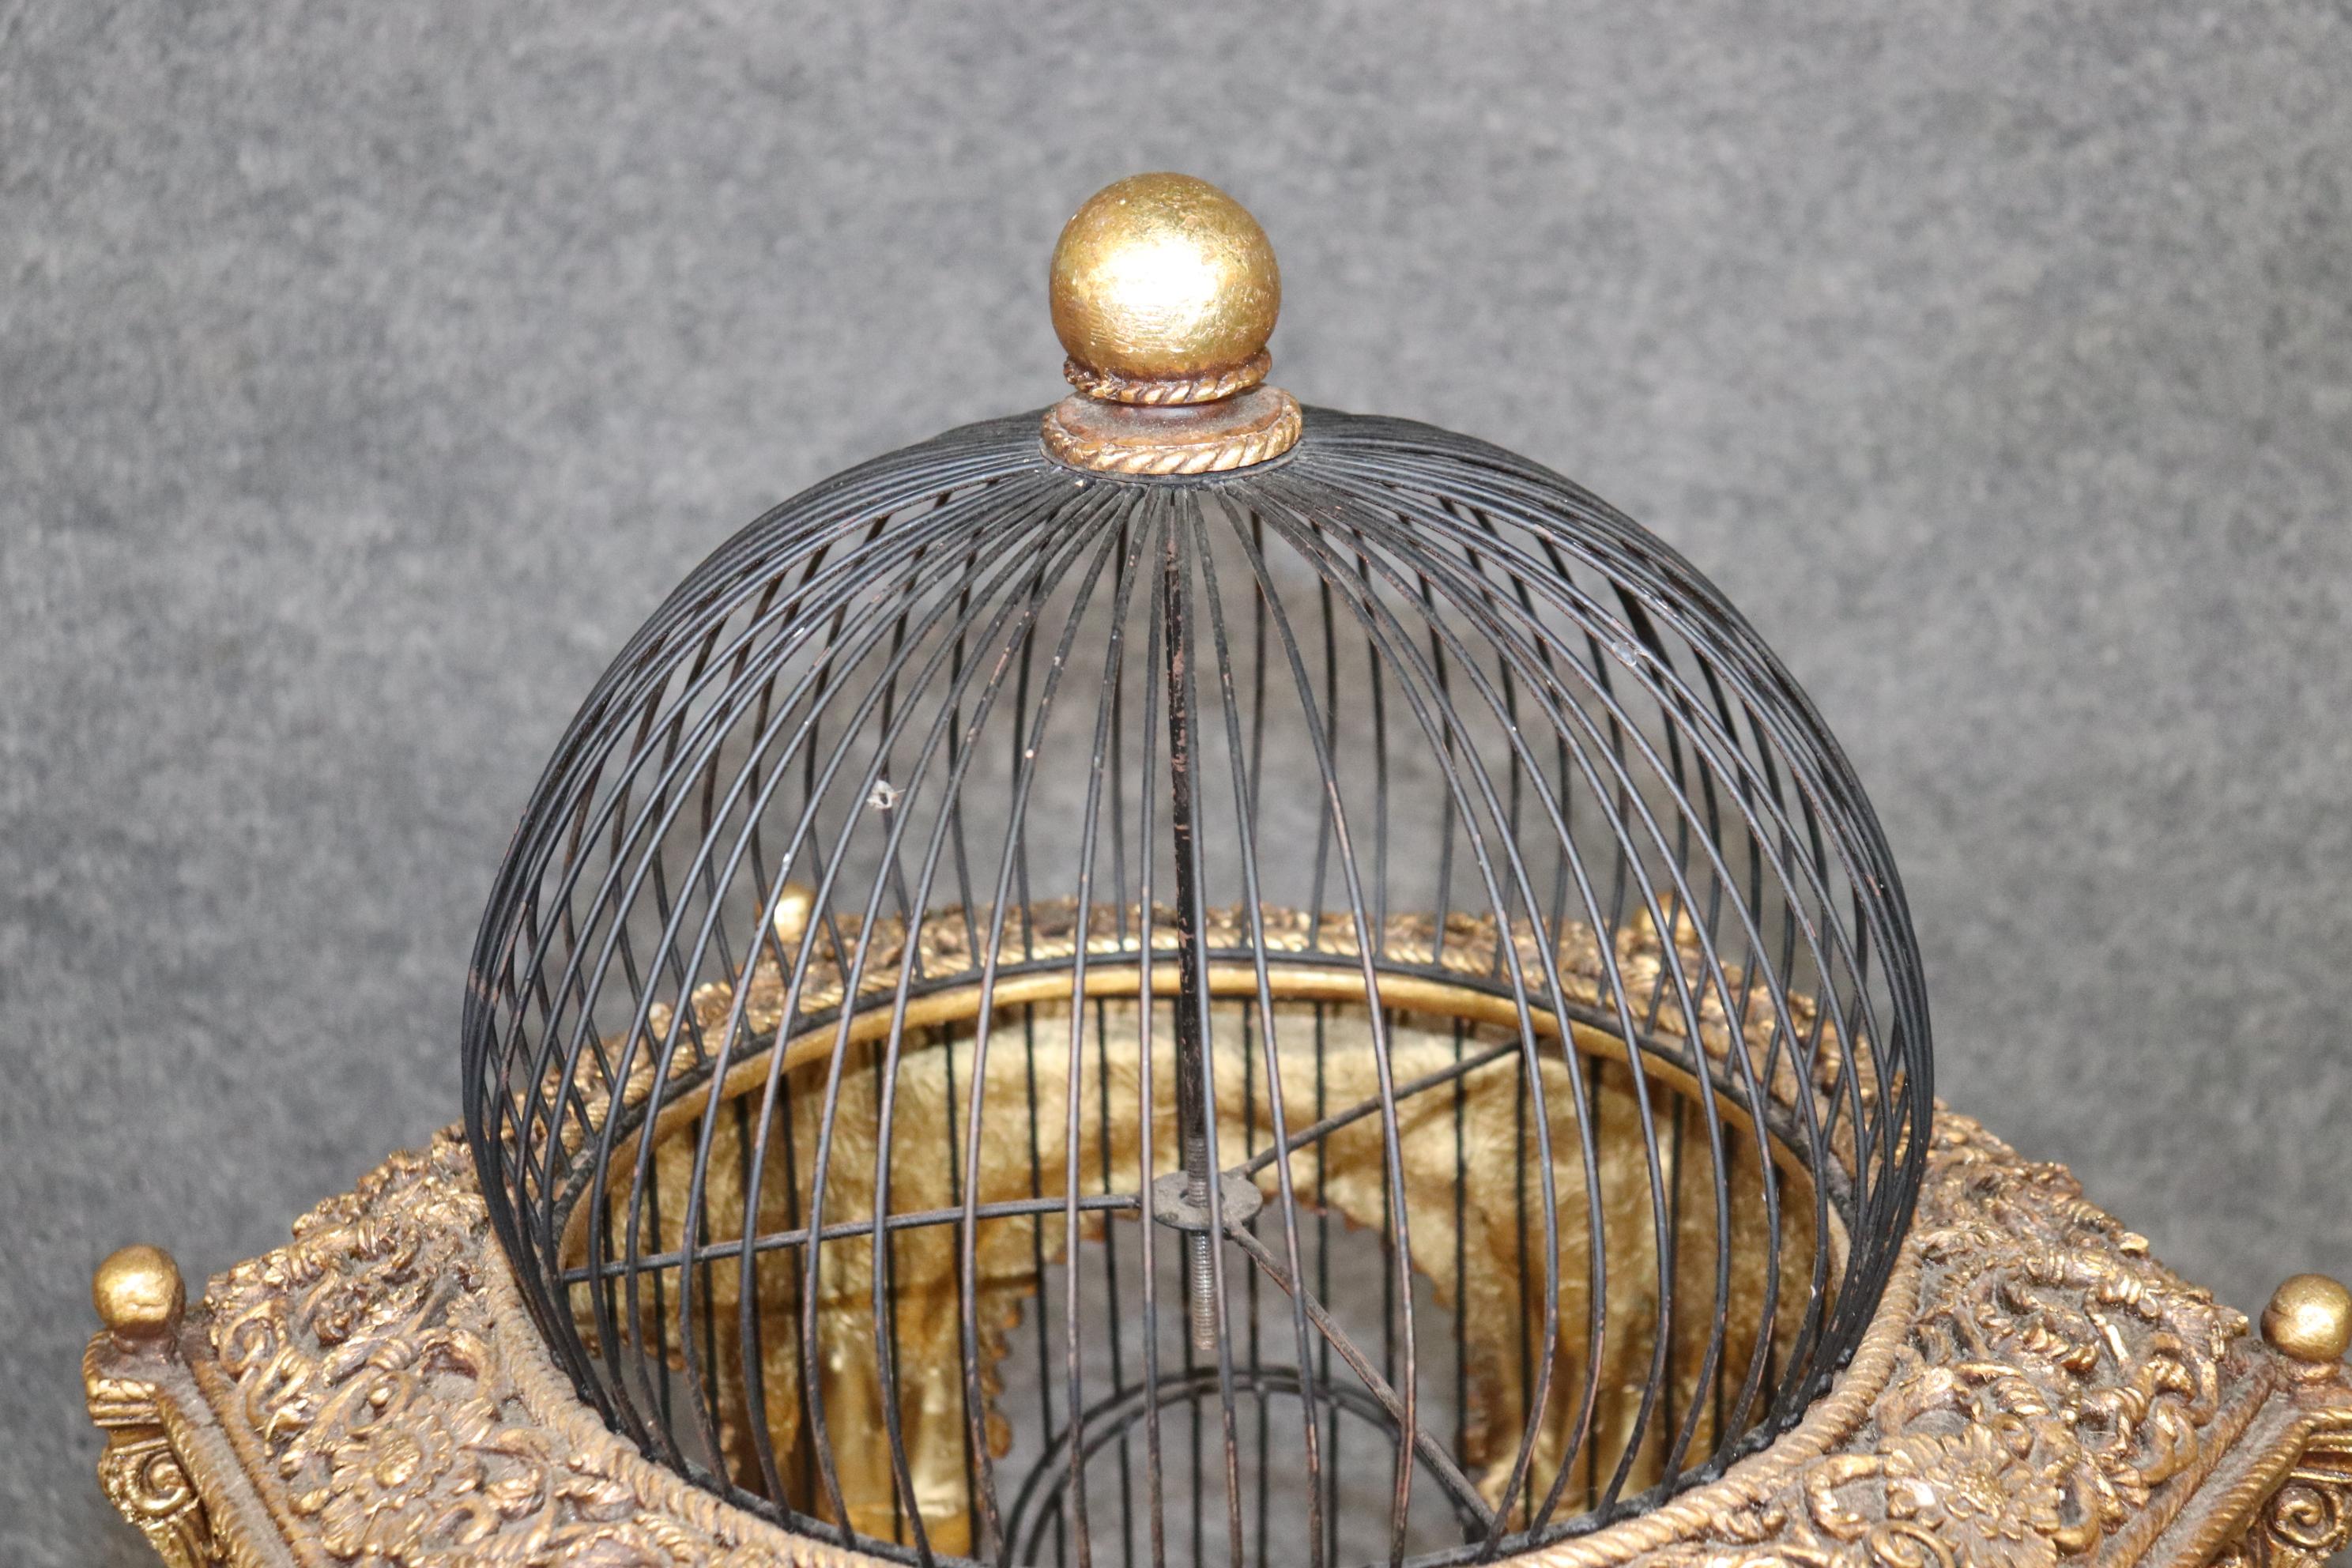 Baroque Elaborate Carved Gilded Arabesque Style Carved Parakeet Bird Cage